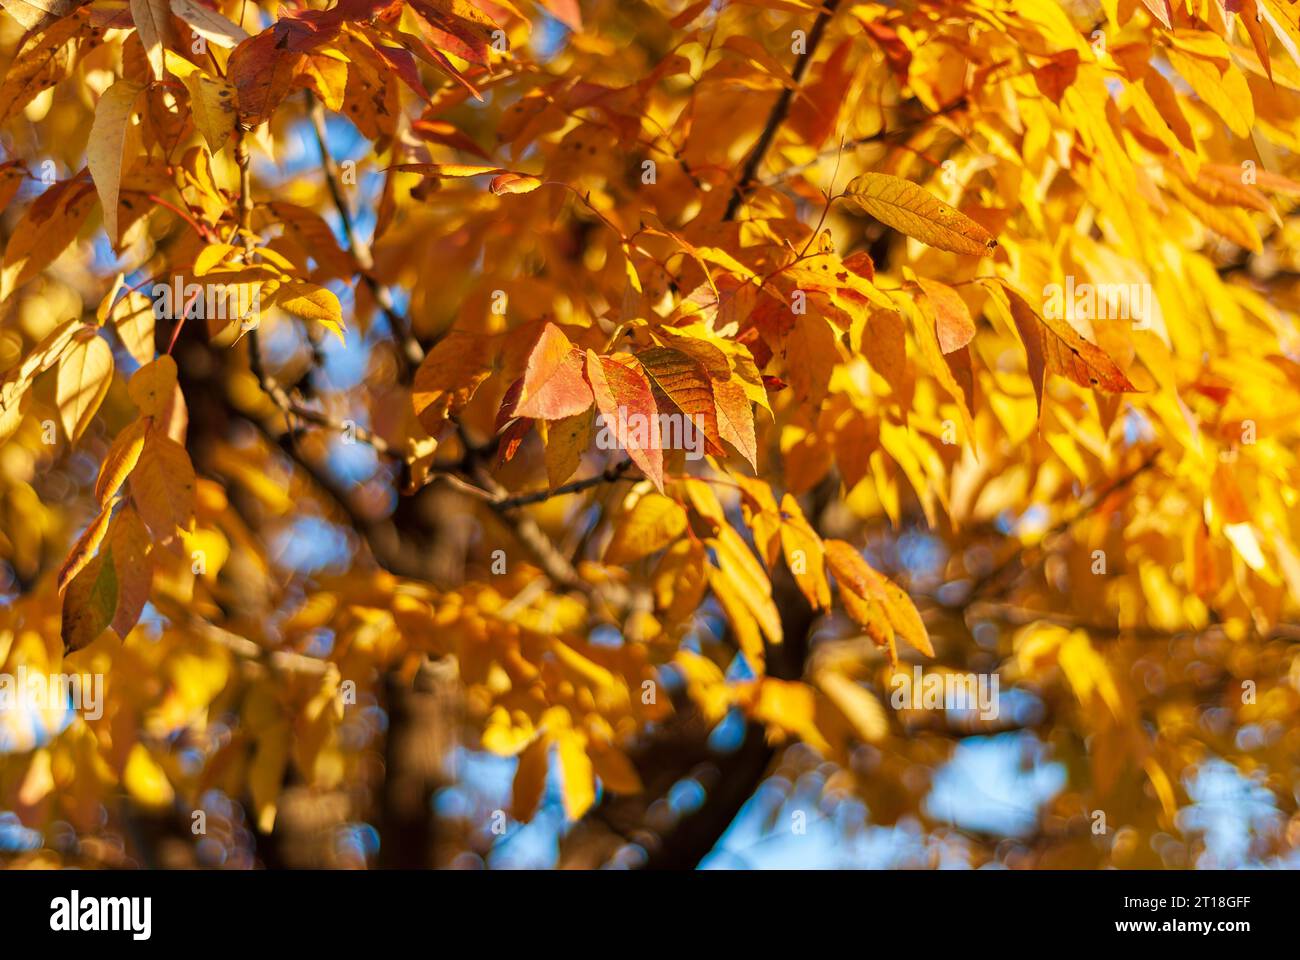 Looking up at spectacular orange fall colors in a three flowered maple tree Stock Photo